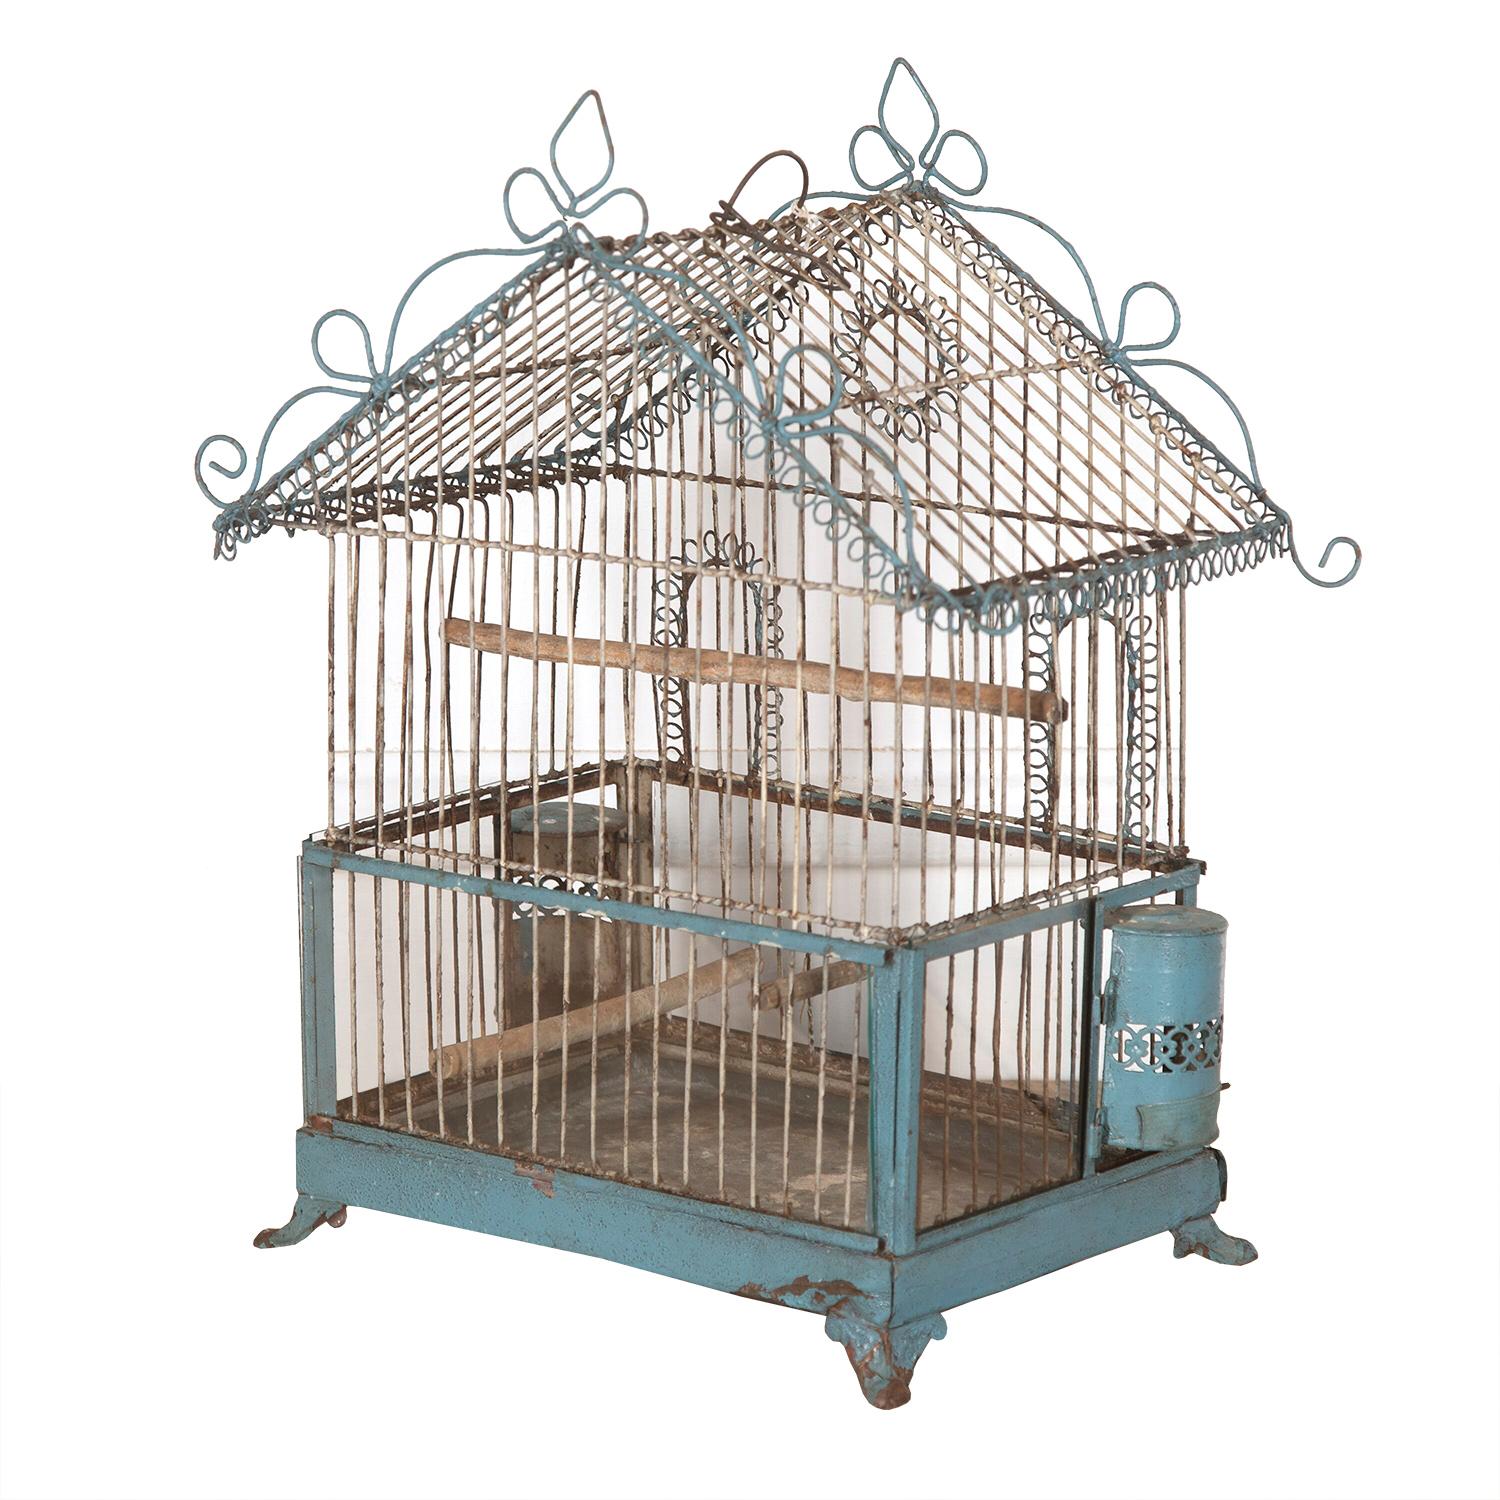 Decorative French 19th century wirework bird cage. 

The elaborate wirework cage rests over an attractive carved wood base with splayed feet. 

Retaining original blue paint to the base and elements of the cage. 

This bird cage will make for